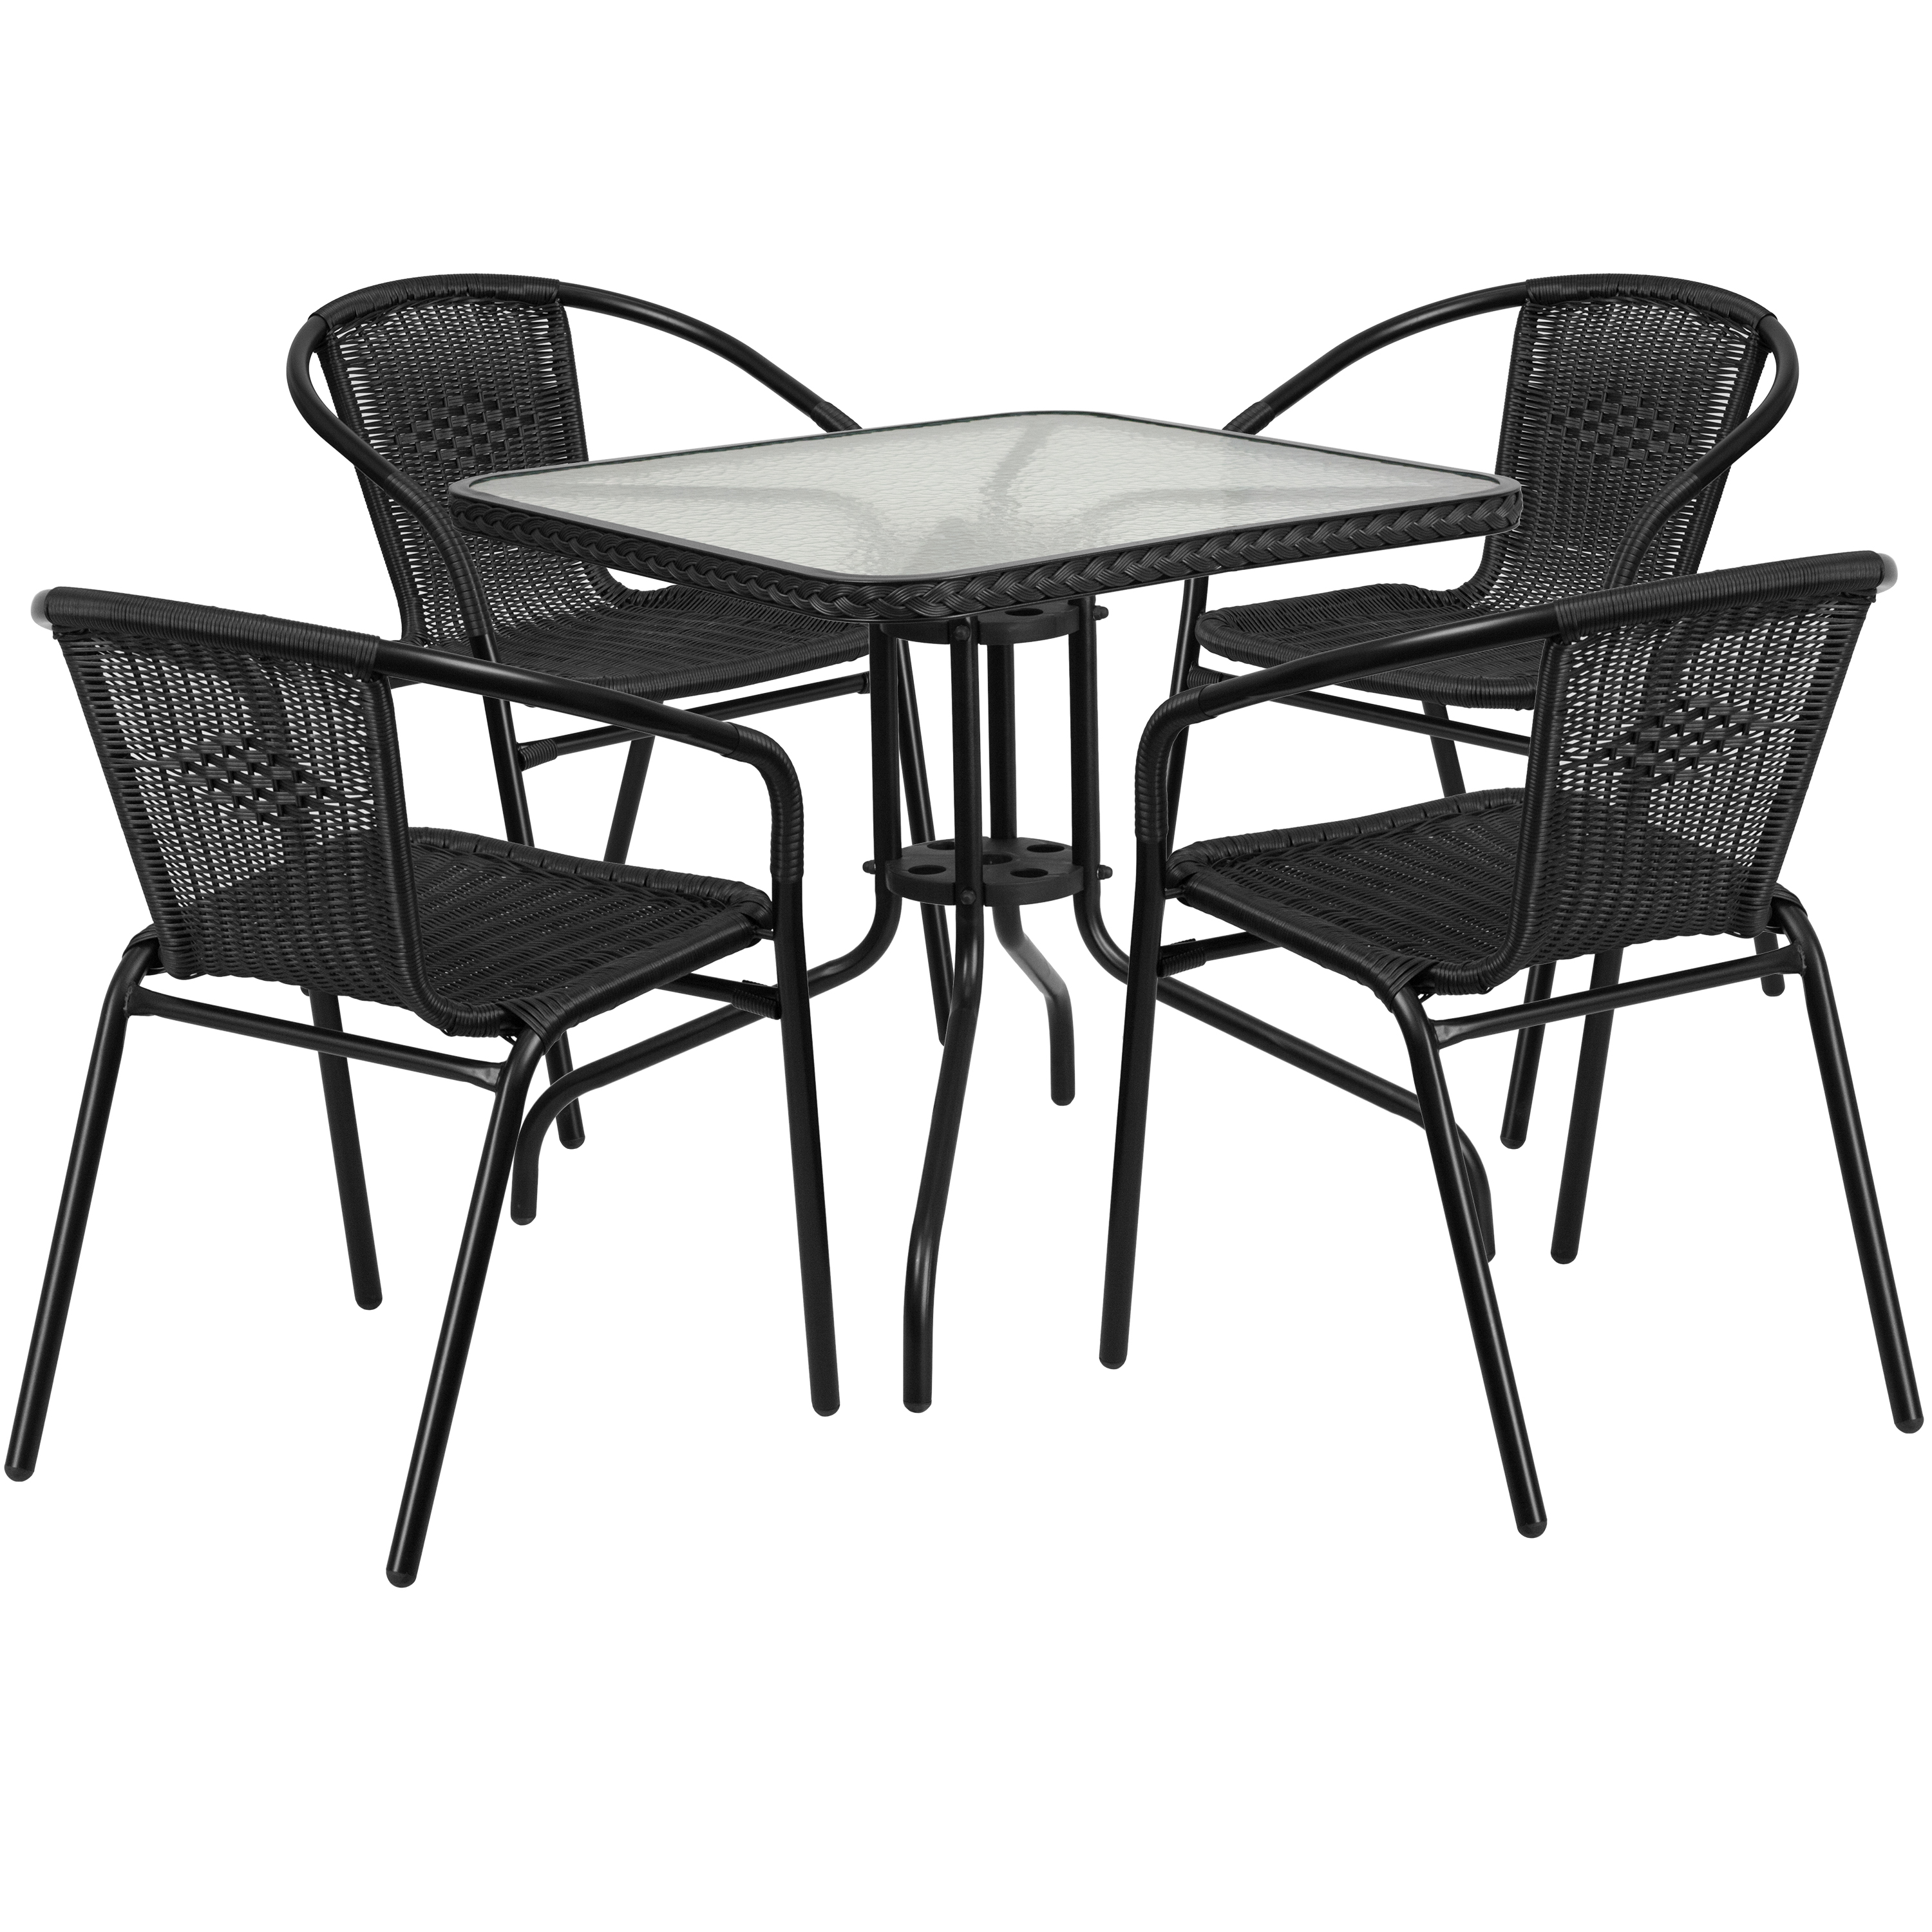 Flash Furniture 28'' Square Glass Metal Table with Black Rattan Edging and 4 Black Rattan Stack Chairs - image 1 of 10